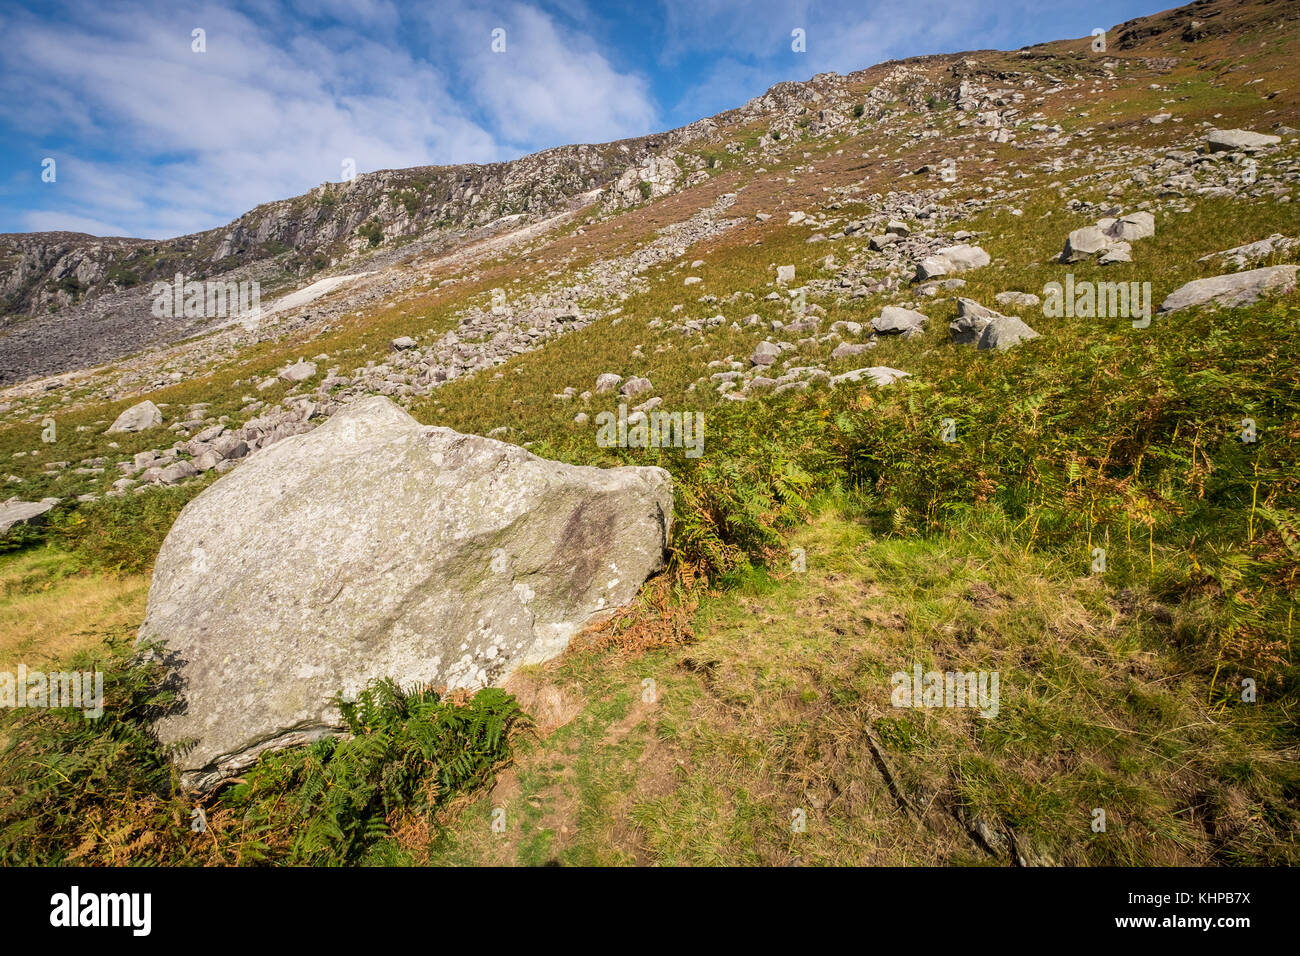 Large schist boulder by the miners village in Glendalough, Wicklow mountains, Ireland Stock Photo